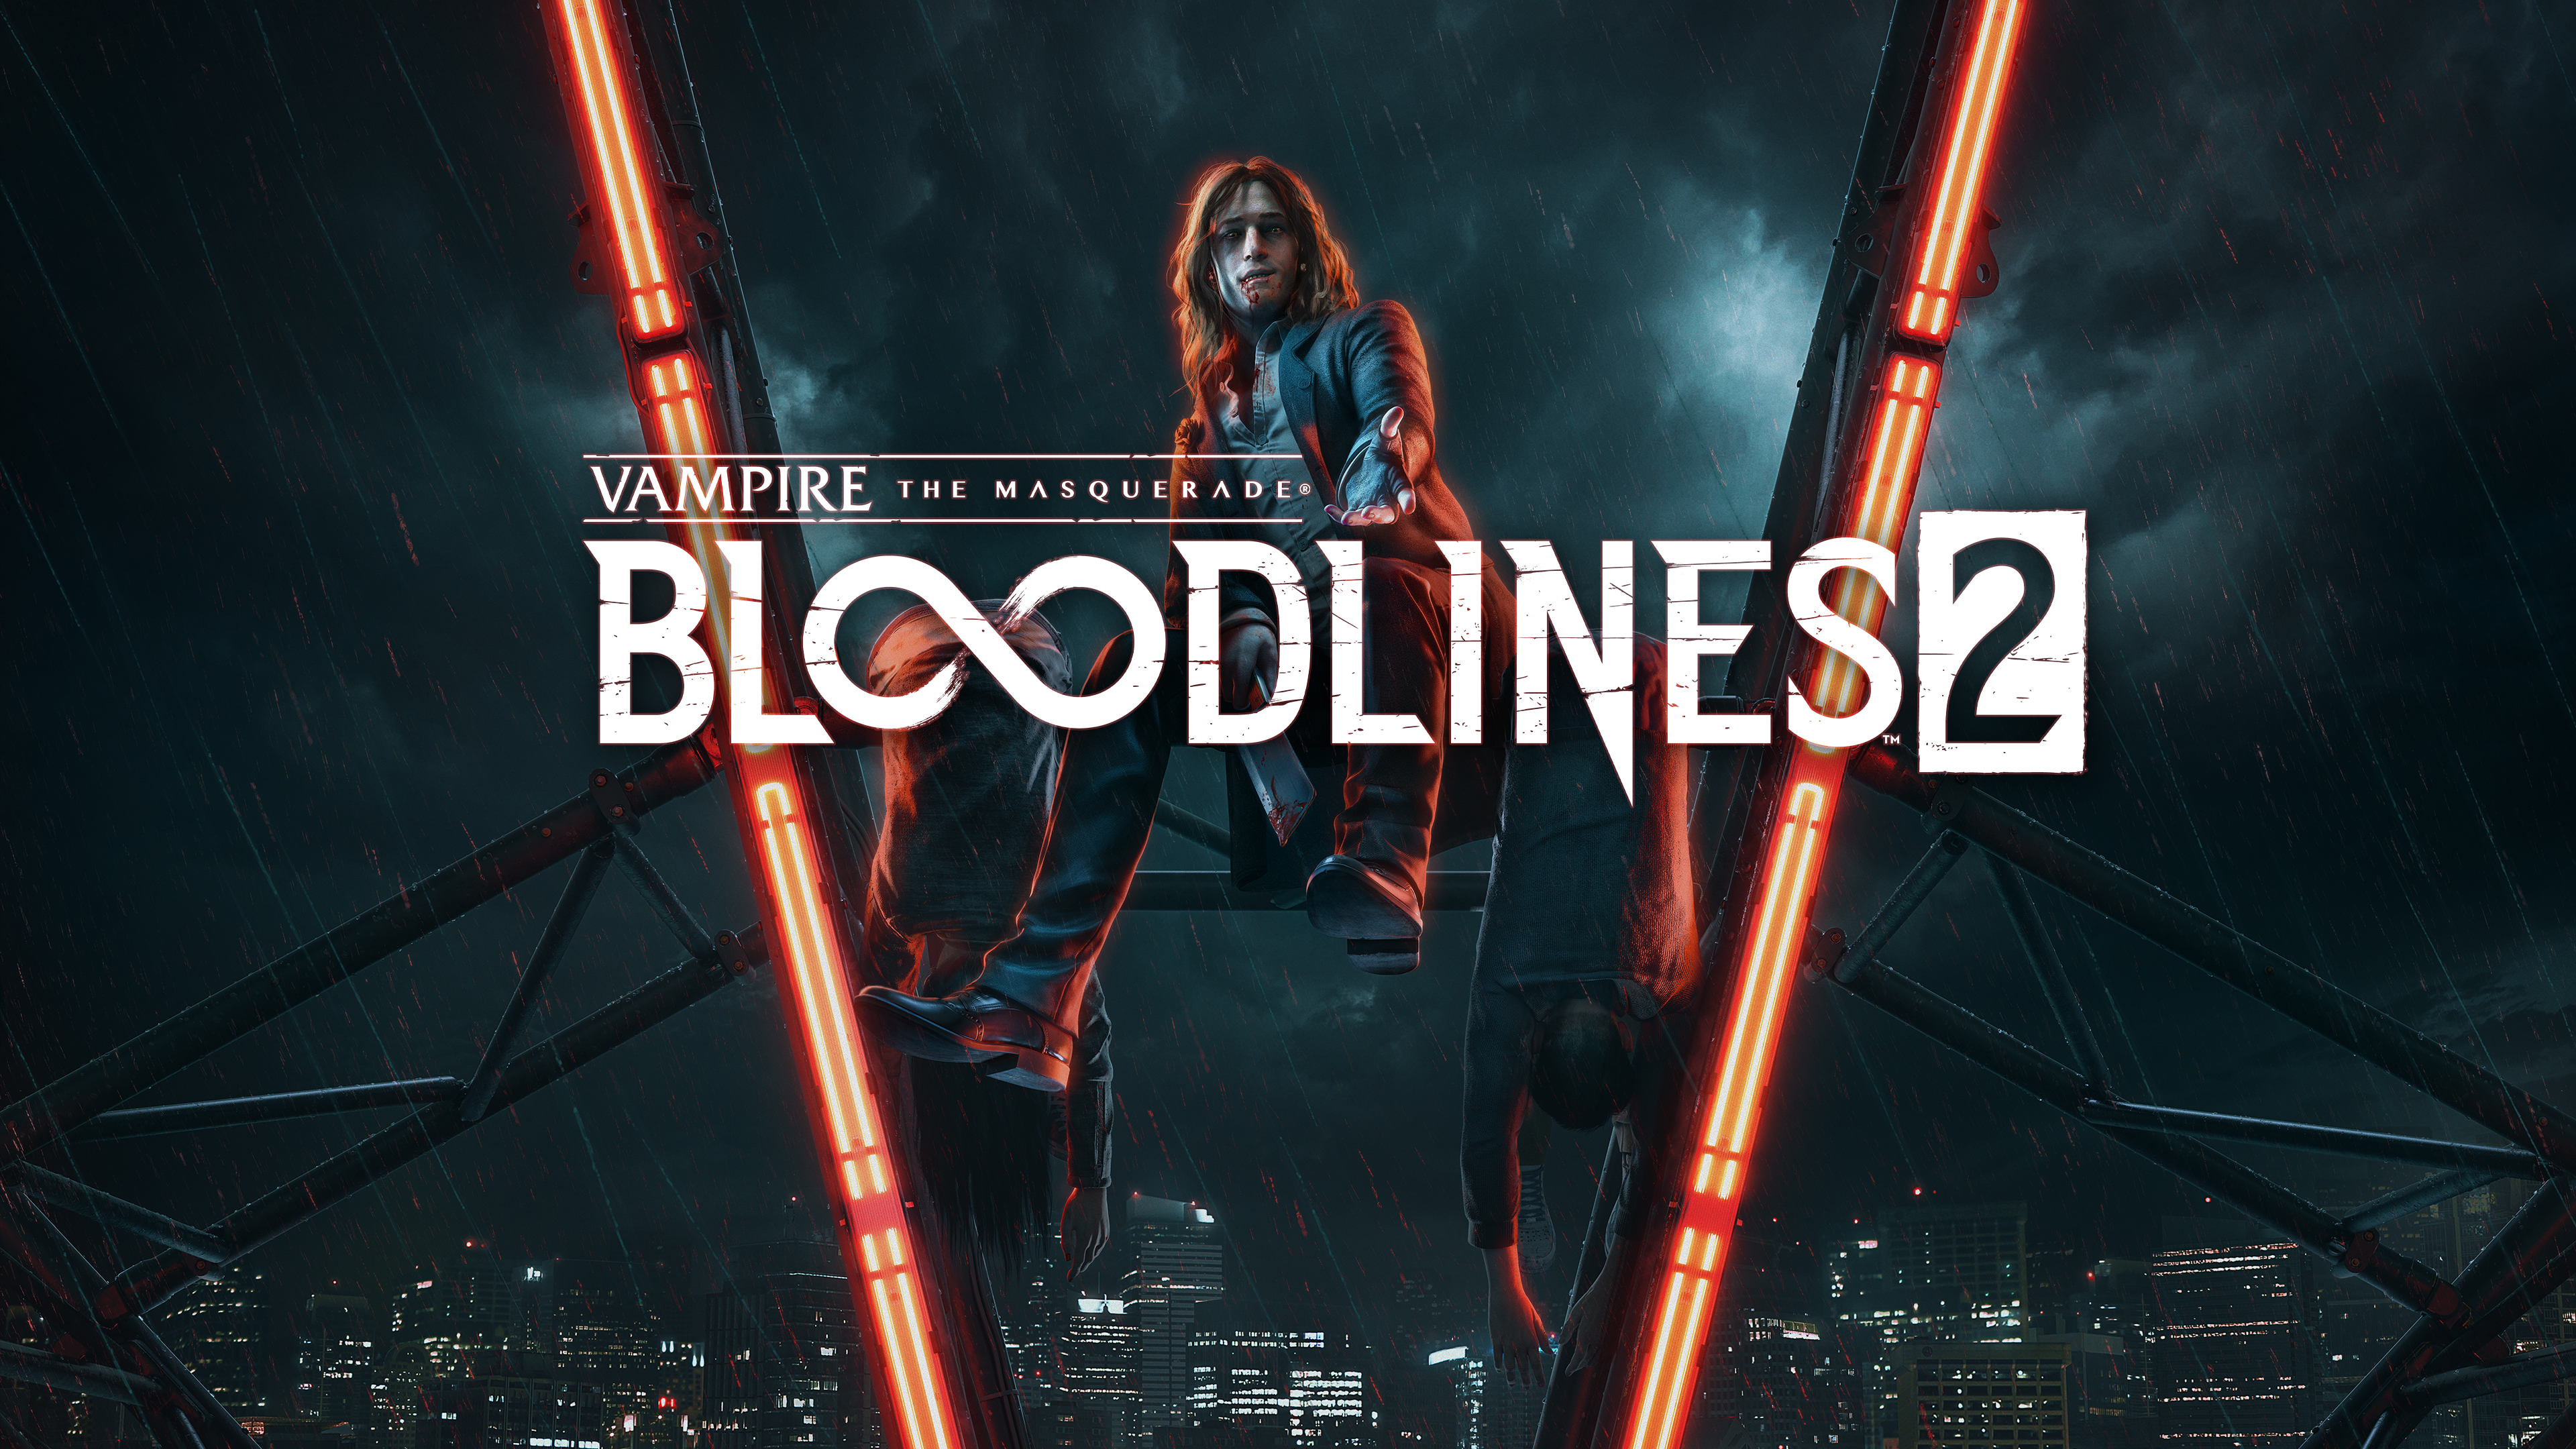 Vampire: The Masquerade - Bloodlines 2 has been delayed to 2021